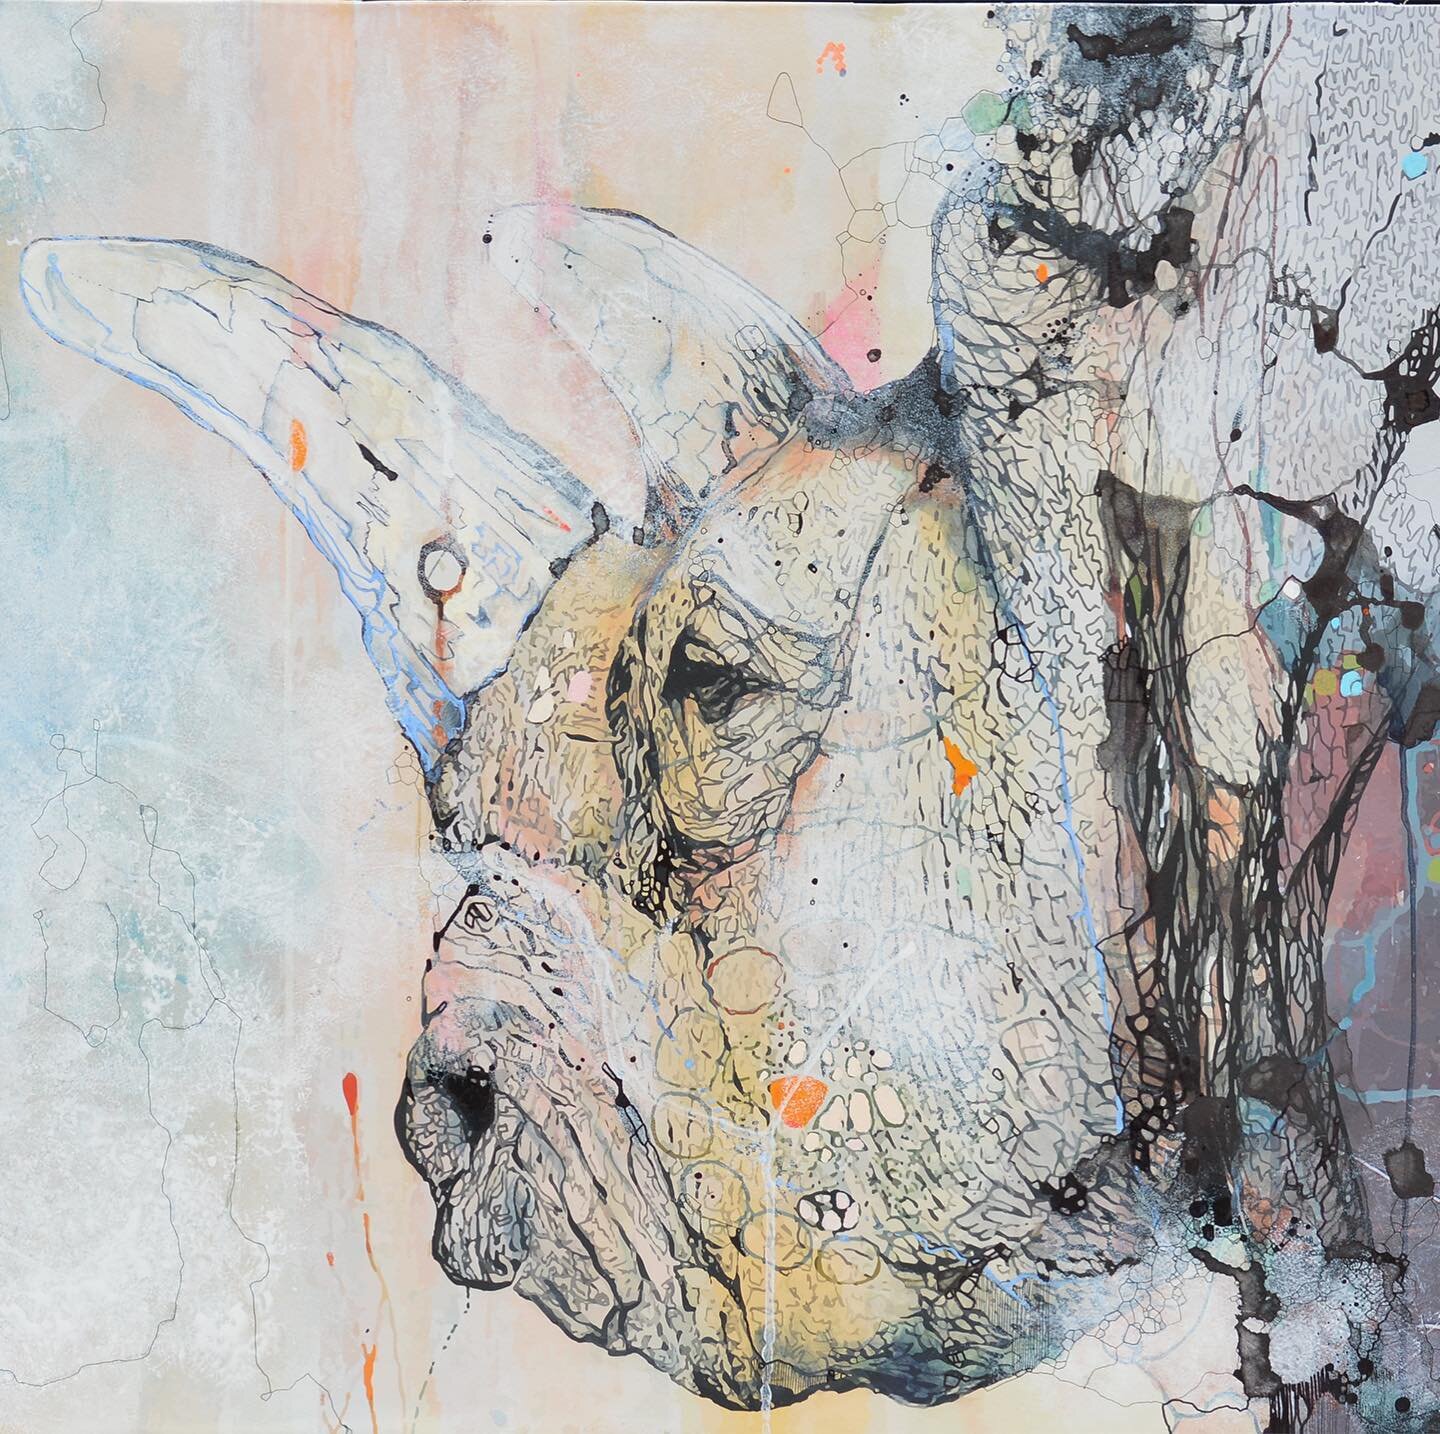 We have an Open Studio SALE! You can buy original art pieces from eElos at our online store (http://eelos.com/store), but only until October 8th, 2020. Hurry up! The 🦏 in the picture is gone (thanks Eden!), we we still have other pieces available. #